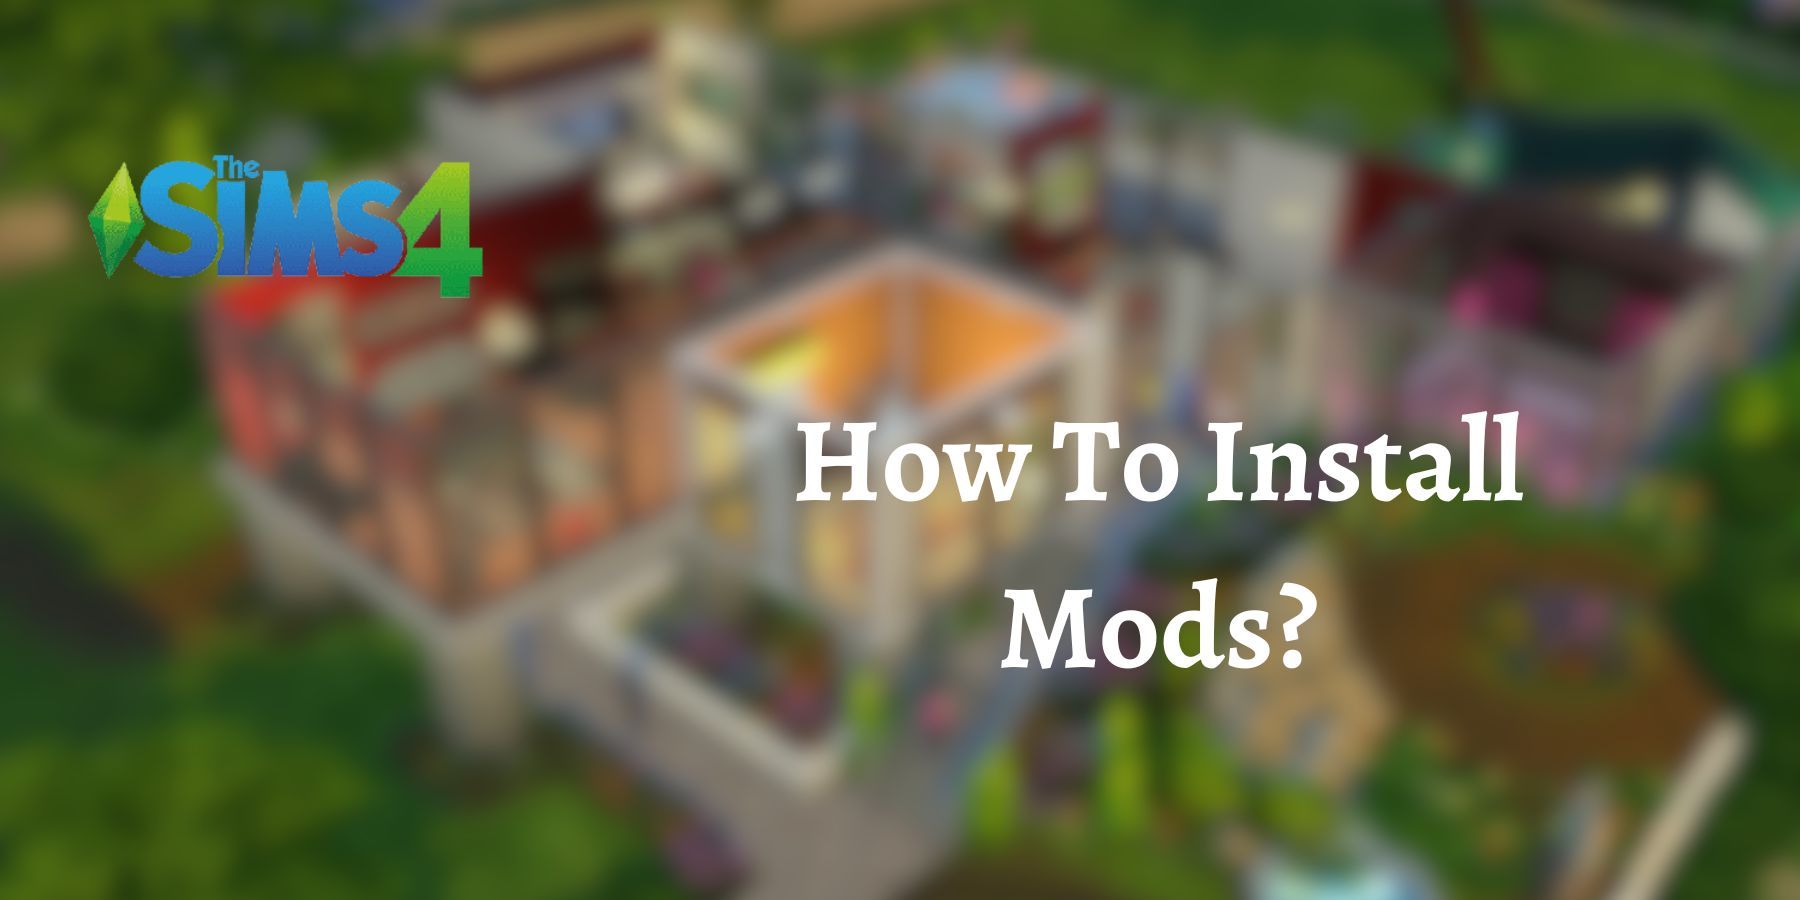 The Sims 4: How to Install Mods